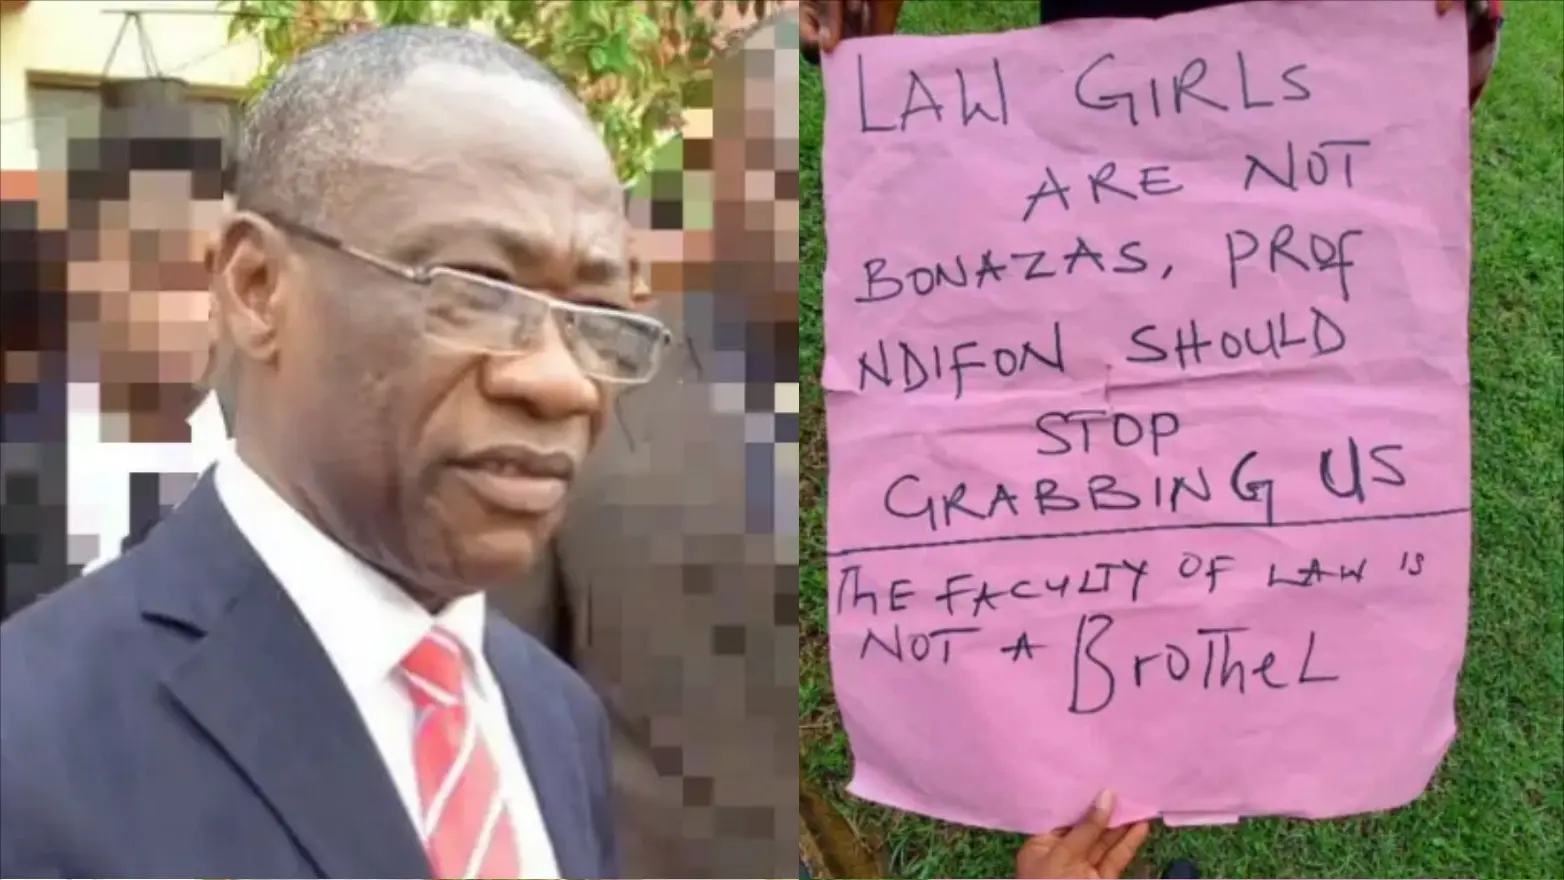 ICPC tenders 70 nude photos, messages against UNICAL Prof Ndifon